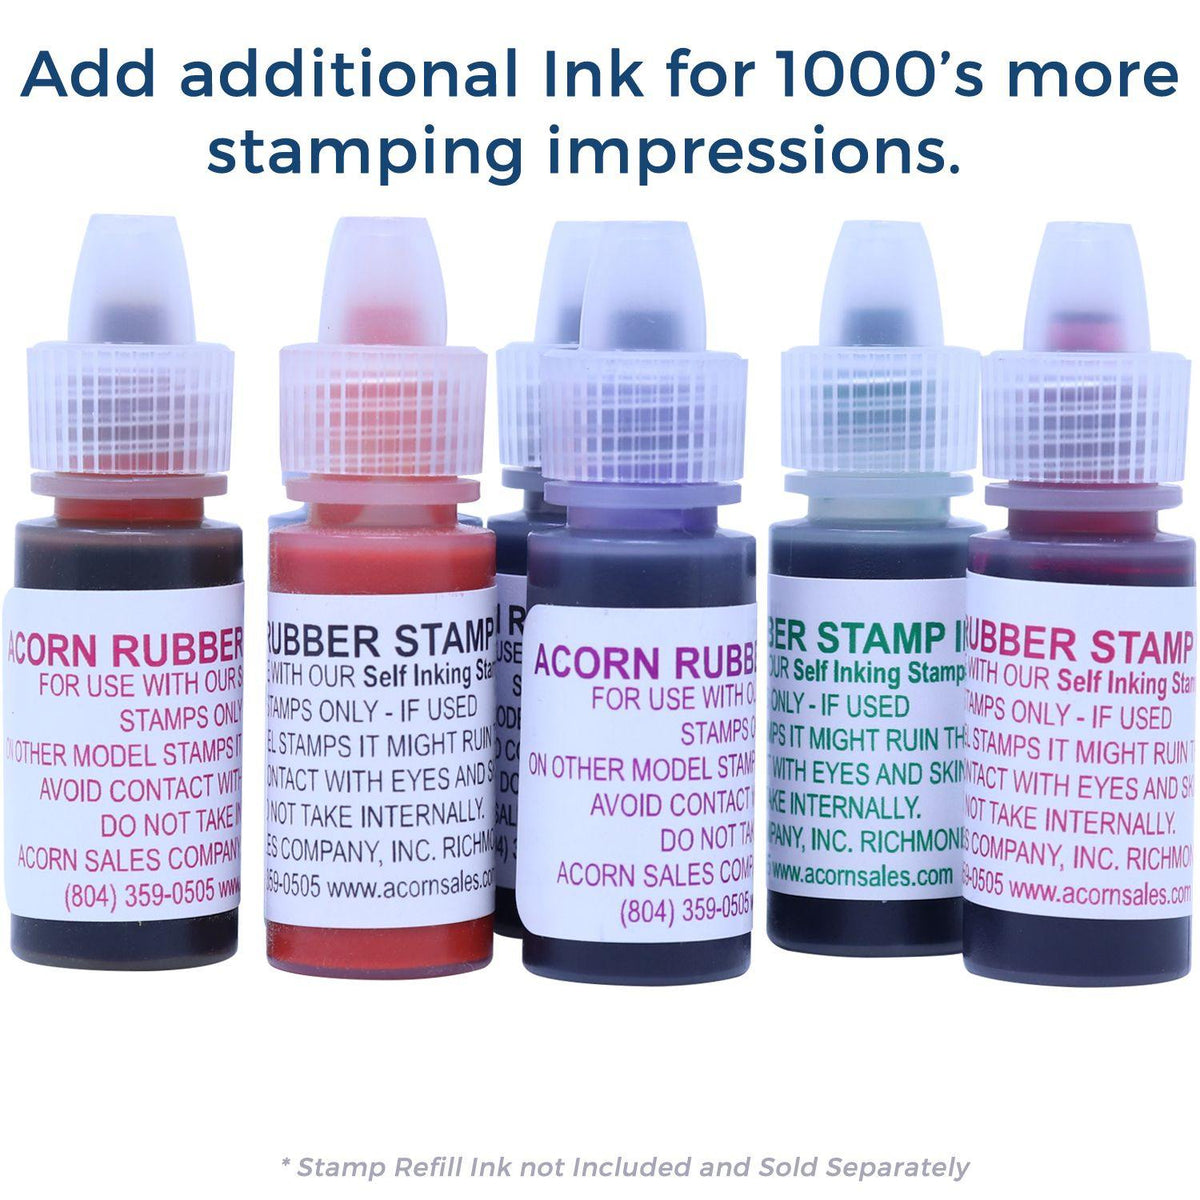 Refill Inks for Large Pre-Inked Shelter in Place Stamp Available